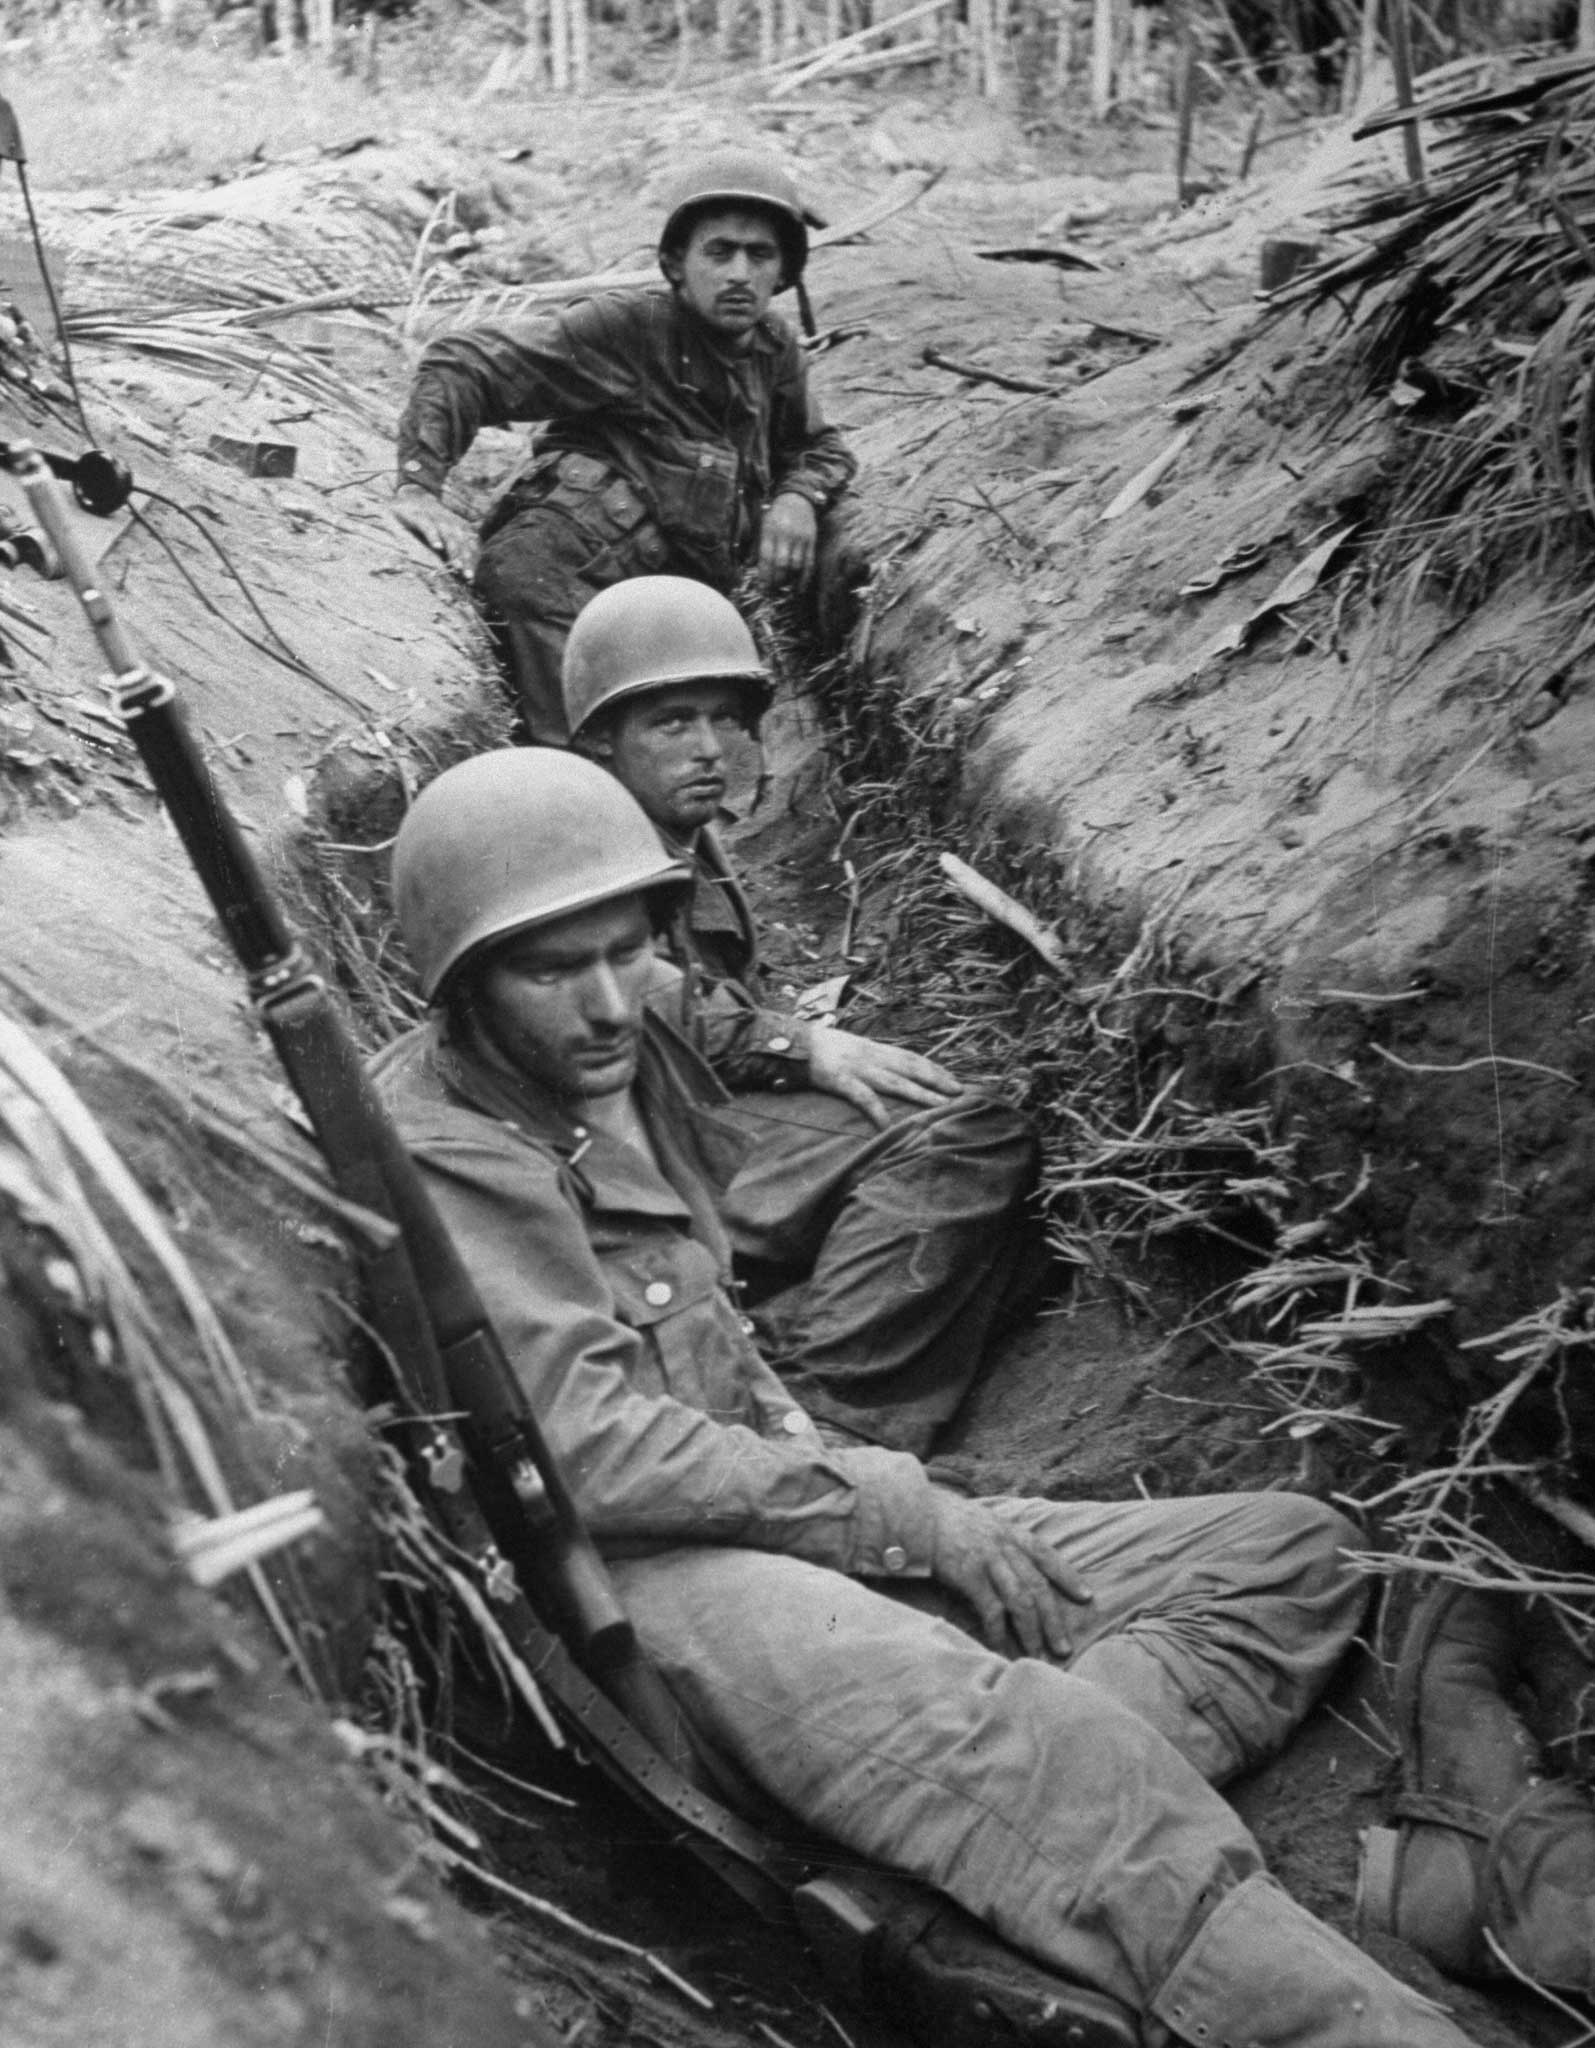 "In a captured Jap intercommunication trench, soldiers rest and clean their guns. Sniping is going on right above them."